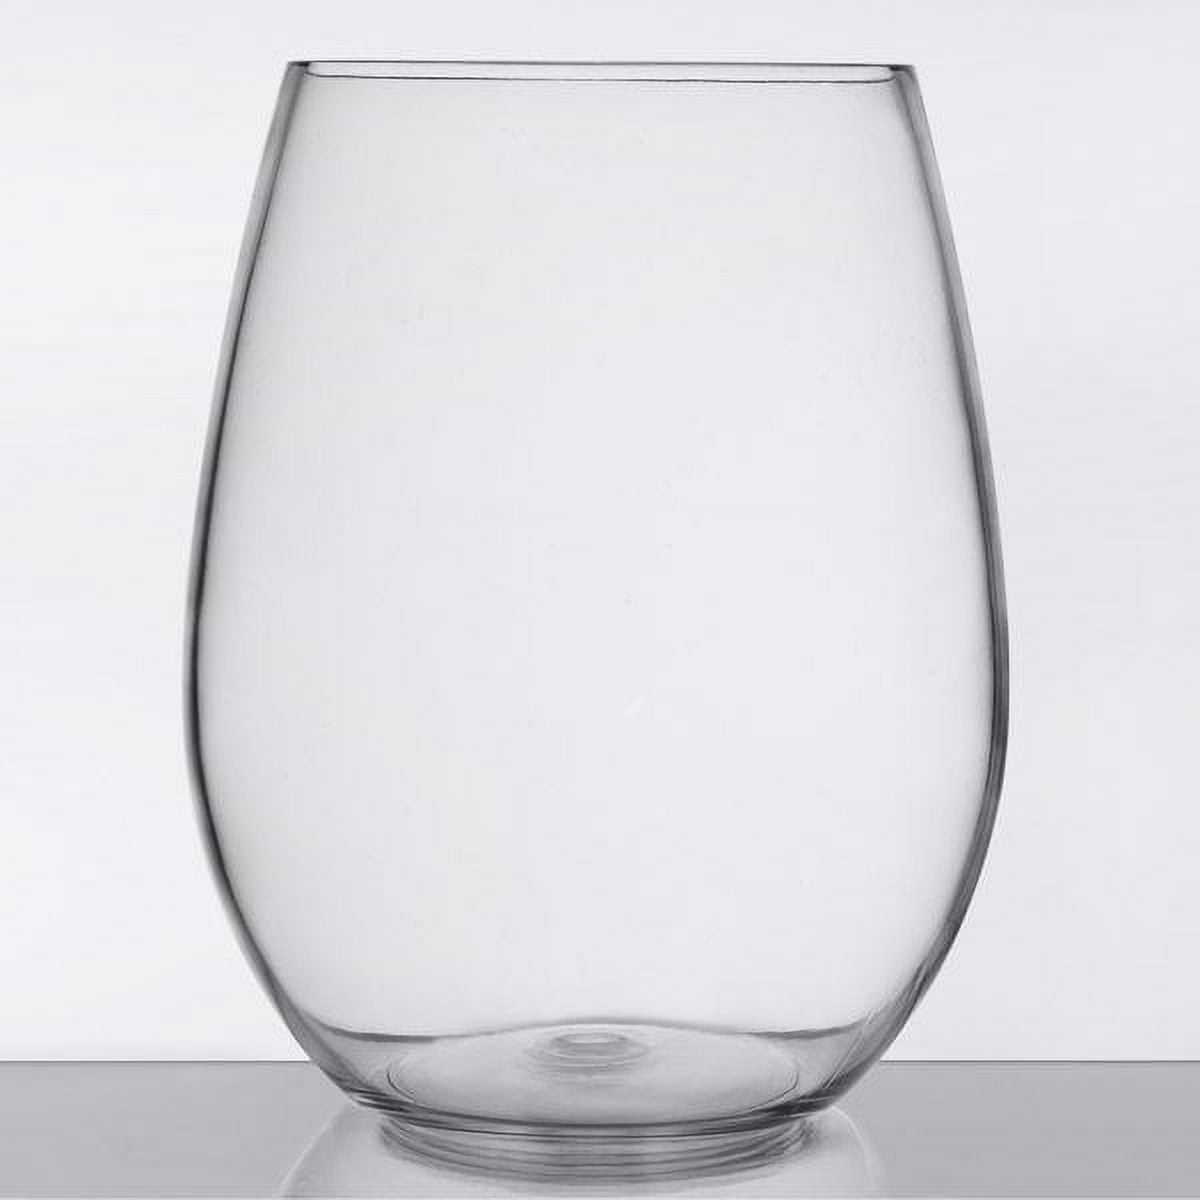 Visions 18 oz. Heavy Weight Clear Plastic Stemless Wine Glass - 64